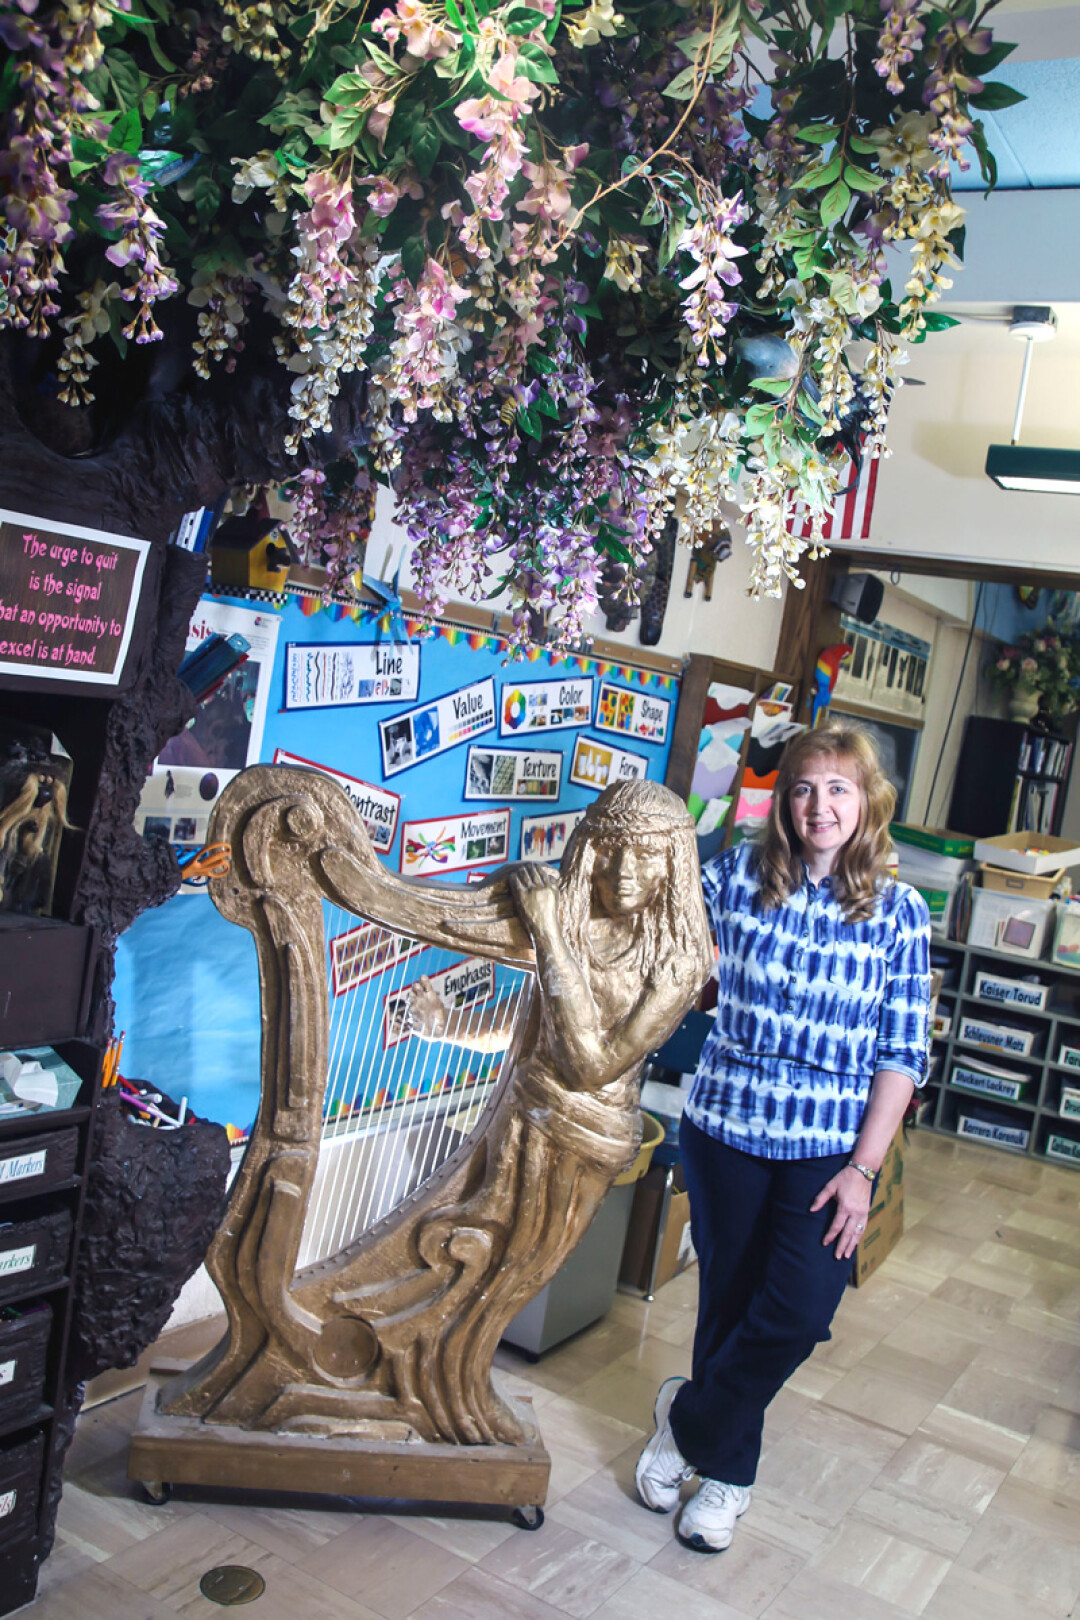 PULLING THE RIGHT STRINGS. Donna Walther of Pederson Elementary in Altoona has been known for decorating her classroom with large-scale pieces of art, including a harp that magically plays when students work hard.